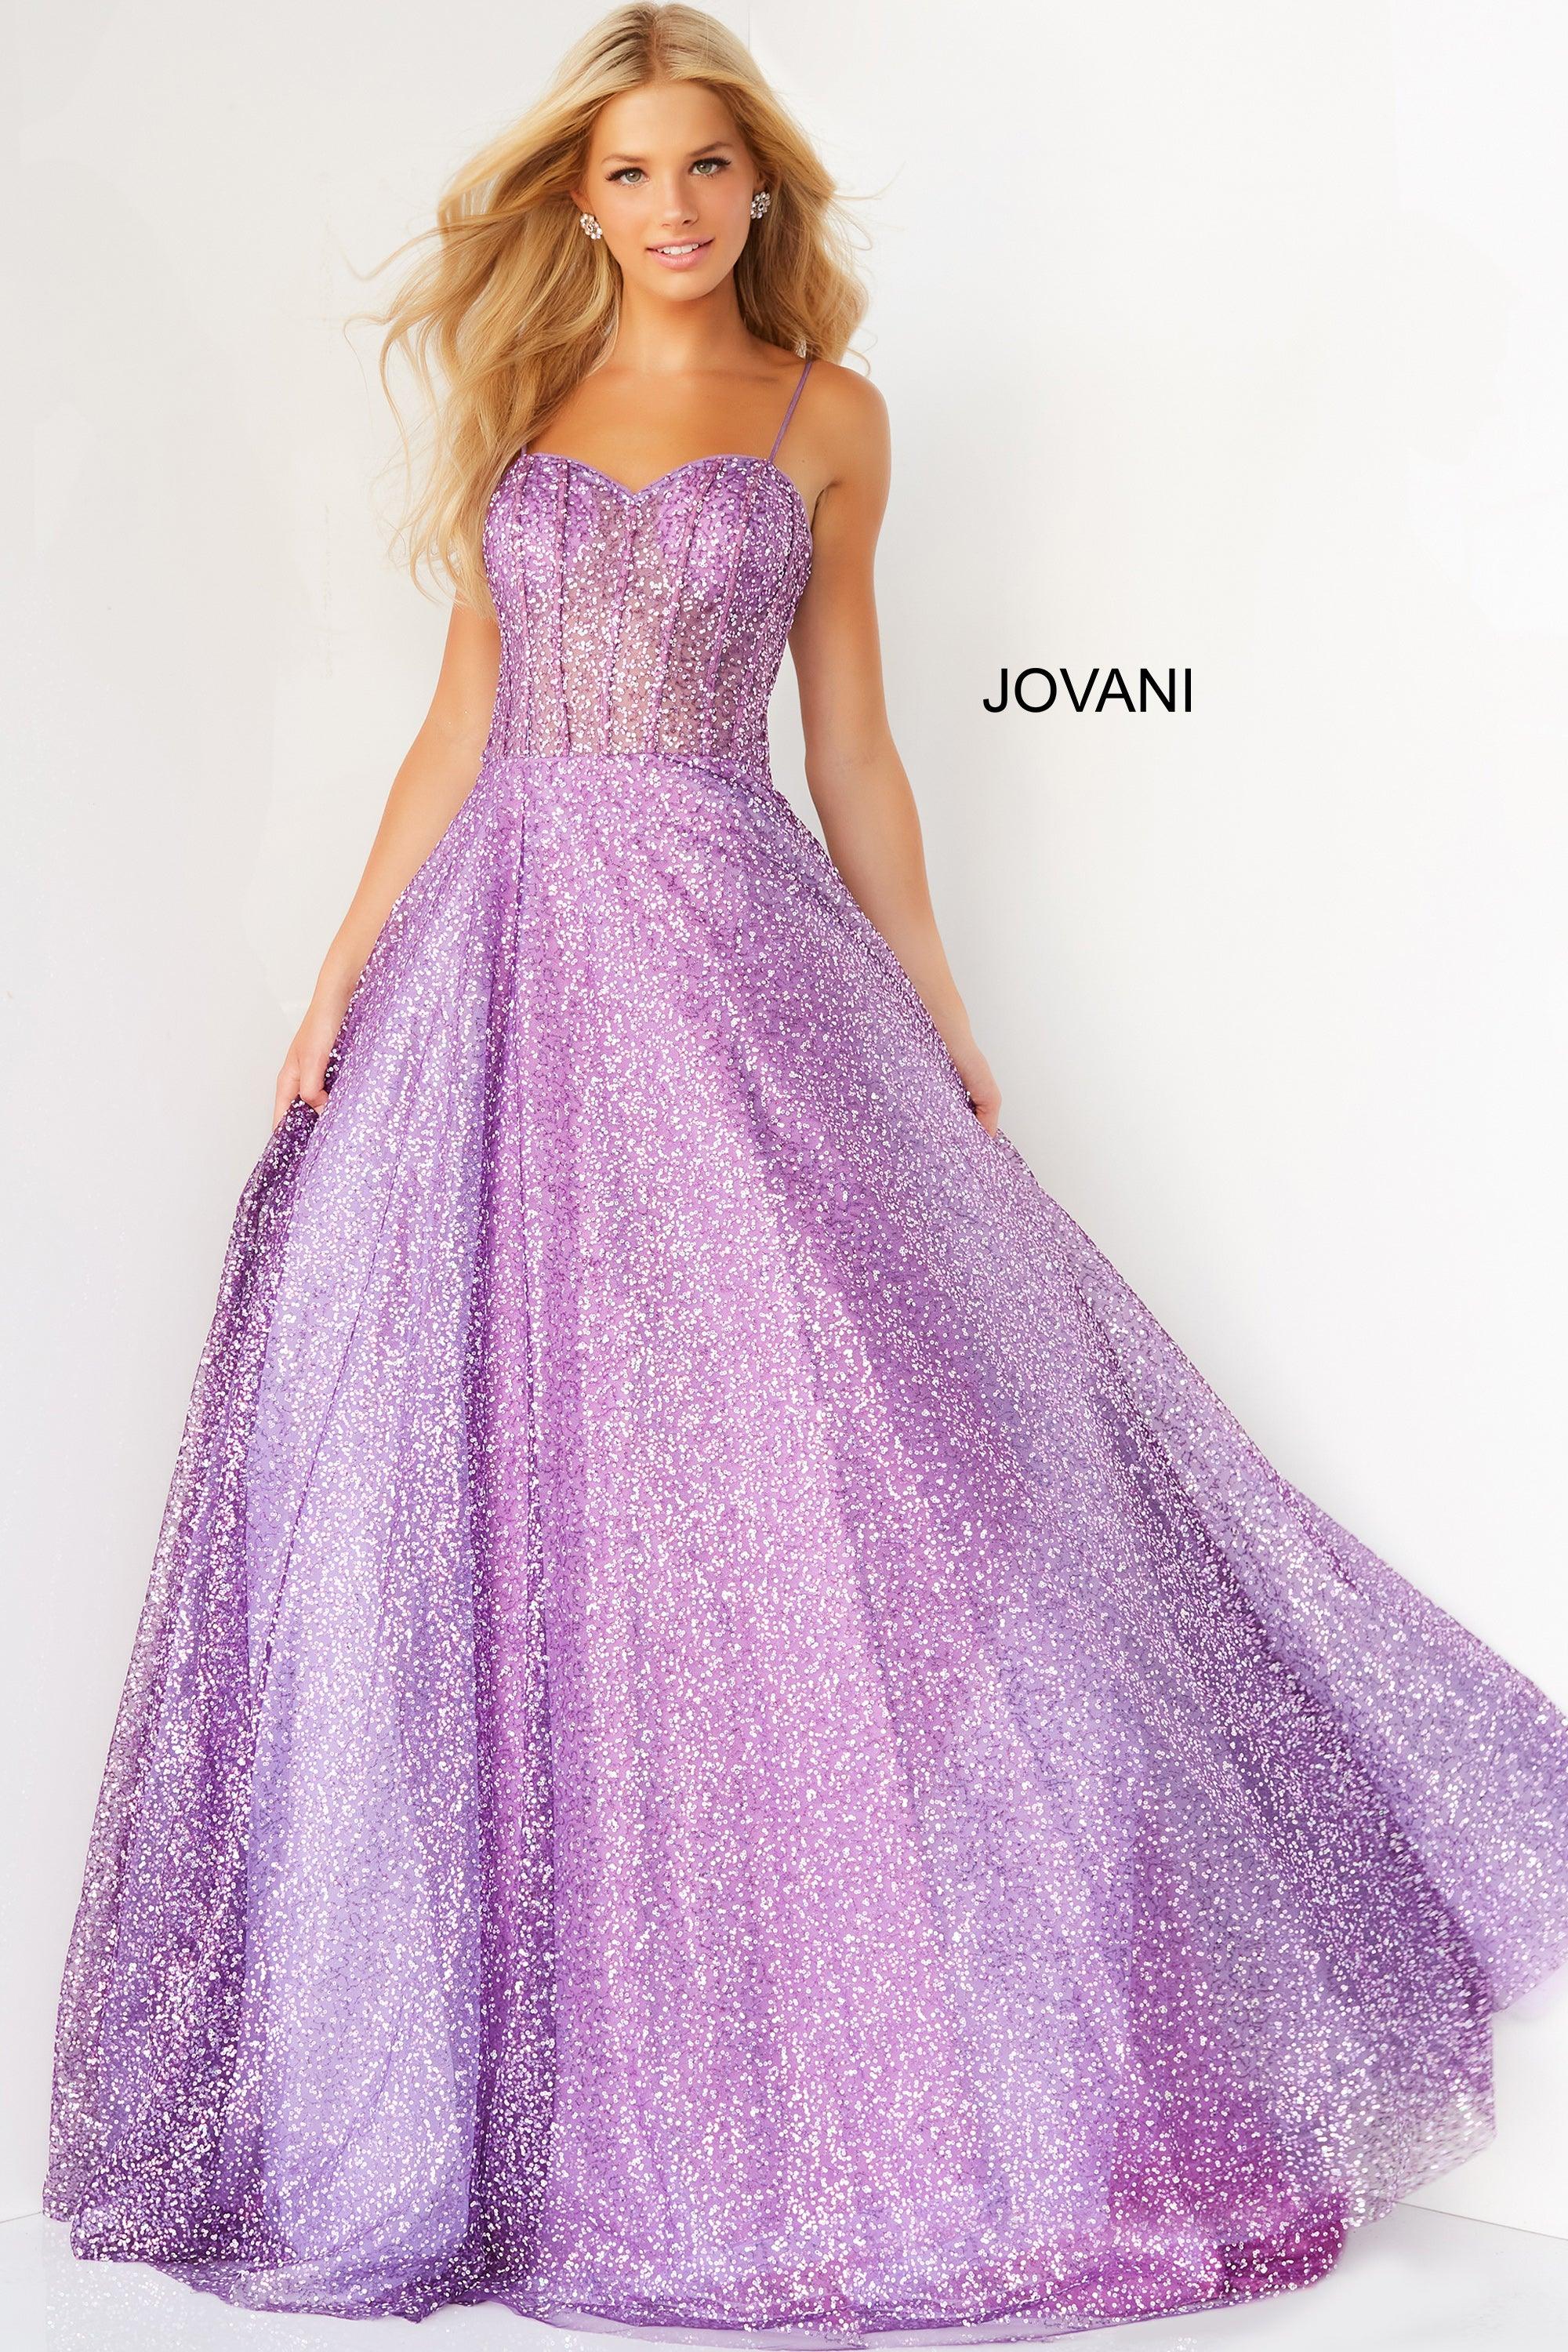 Jovani 07423 Prom Spaghetti Strap Long Formal Gown | The Dress Outlet